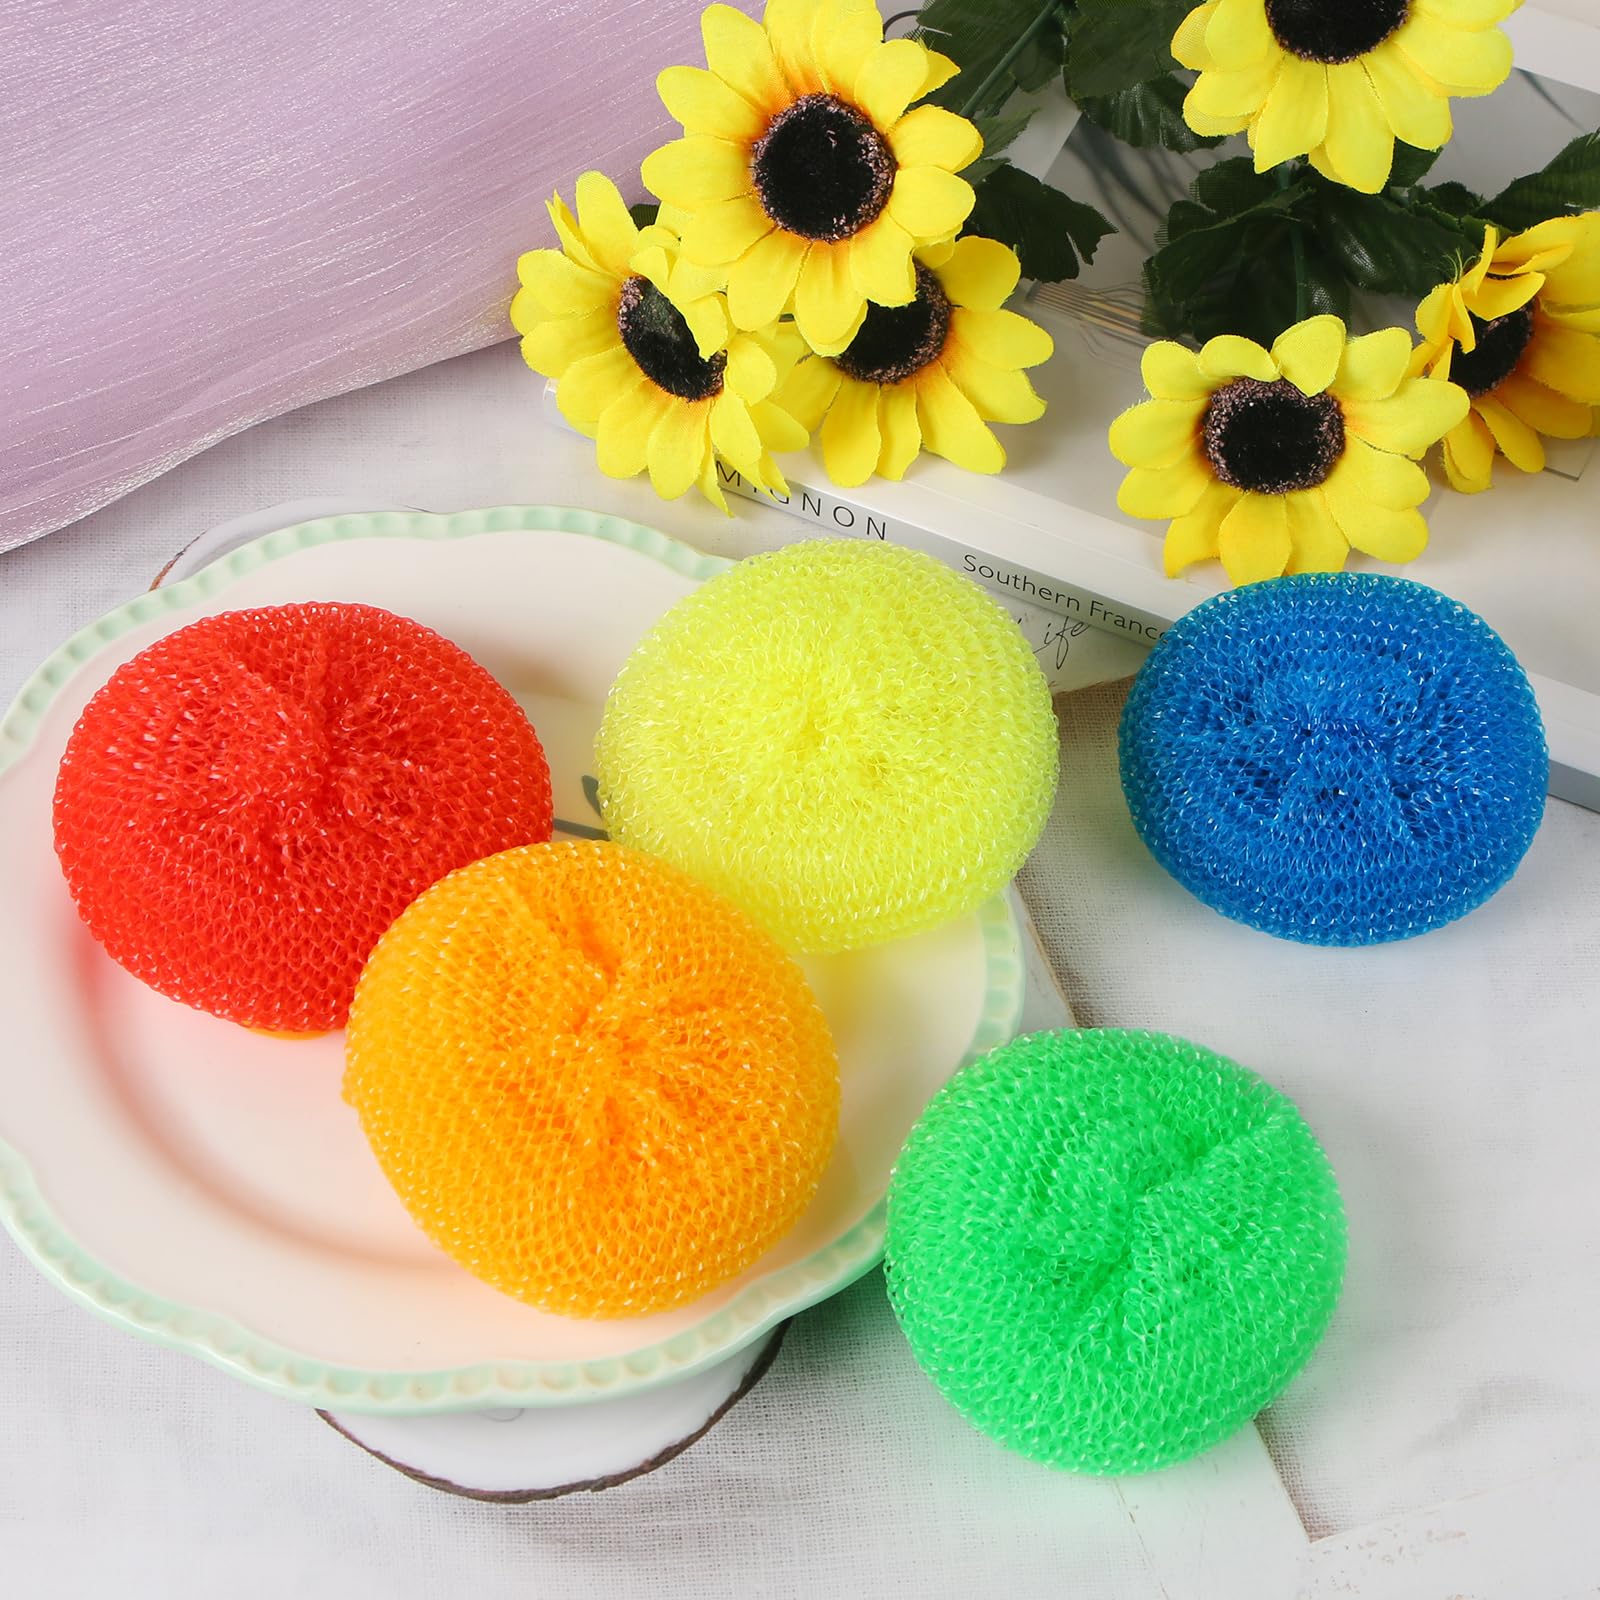 MIDELONG Plastic Dish Scrubbers for Dishes Plastic Pot Round Scrubber Scouring Non Scratch Dish Scourers, Assorted Colors Poly Mesh Scouring Dish Brush Pads for Kitchen Cleaning, 5 Pcs